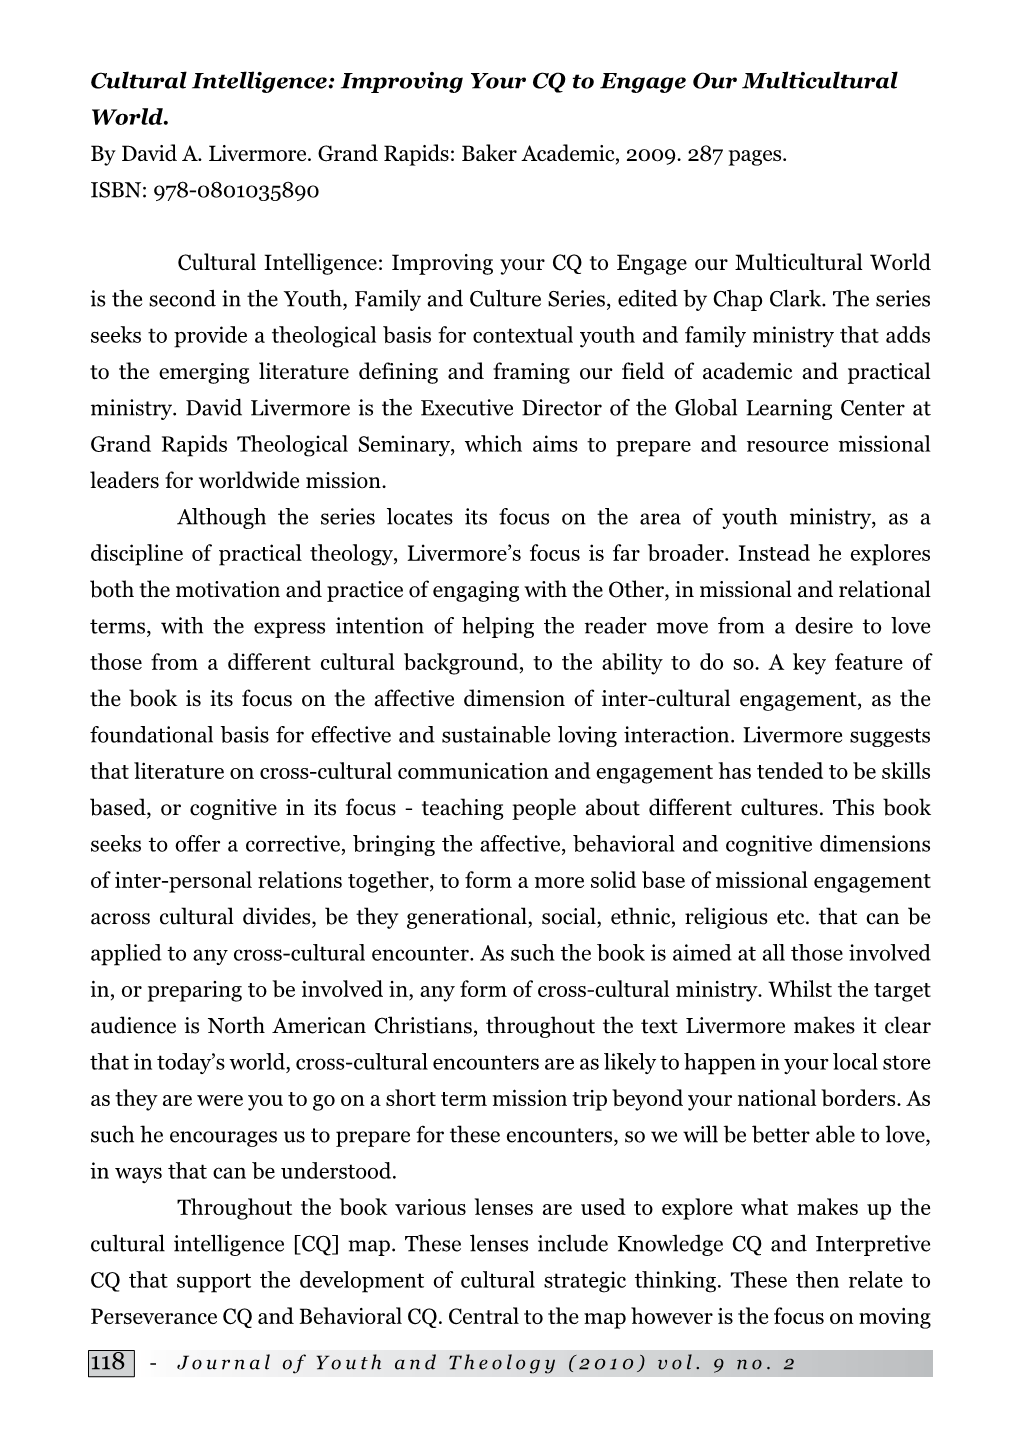 Cultural Intelligence: Improving Your CQ to Engage Our Multicultural World. by David A. Livermore. Grand Rapids: Baker Academic, 2009